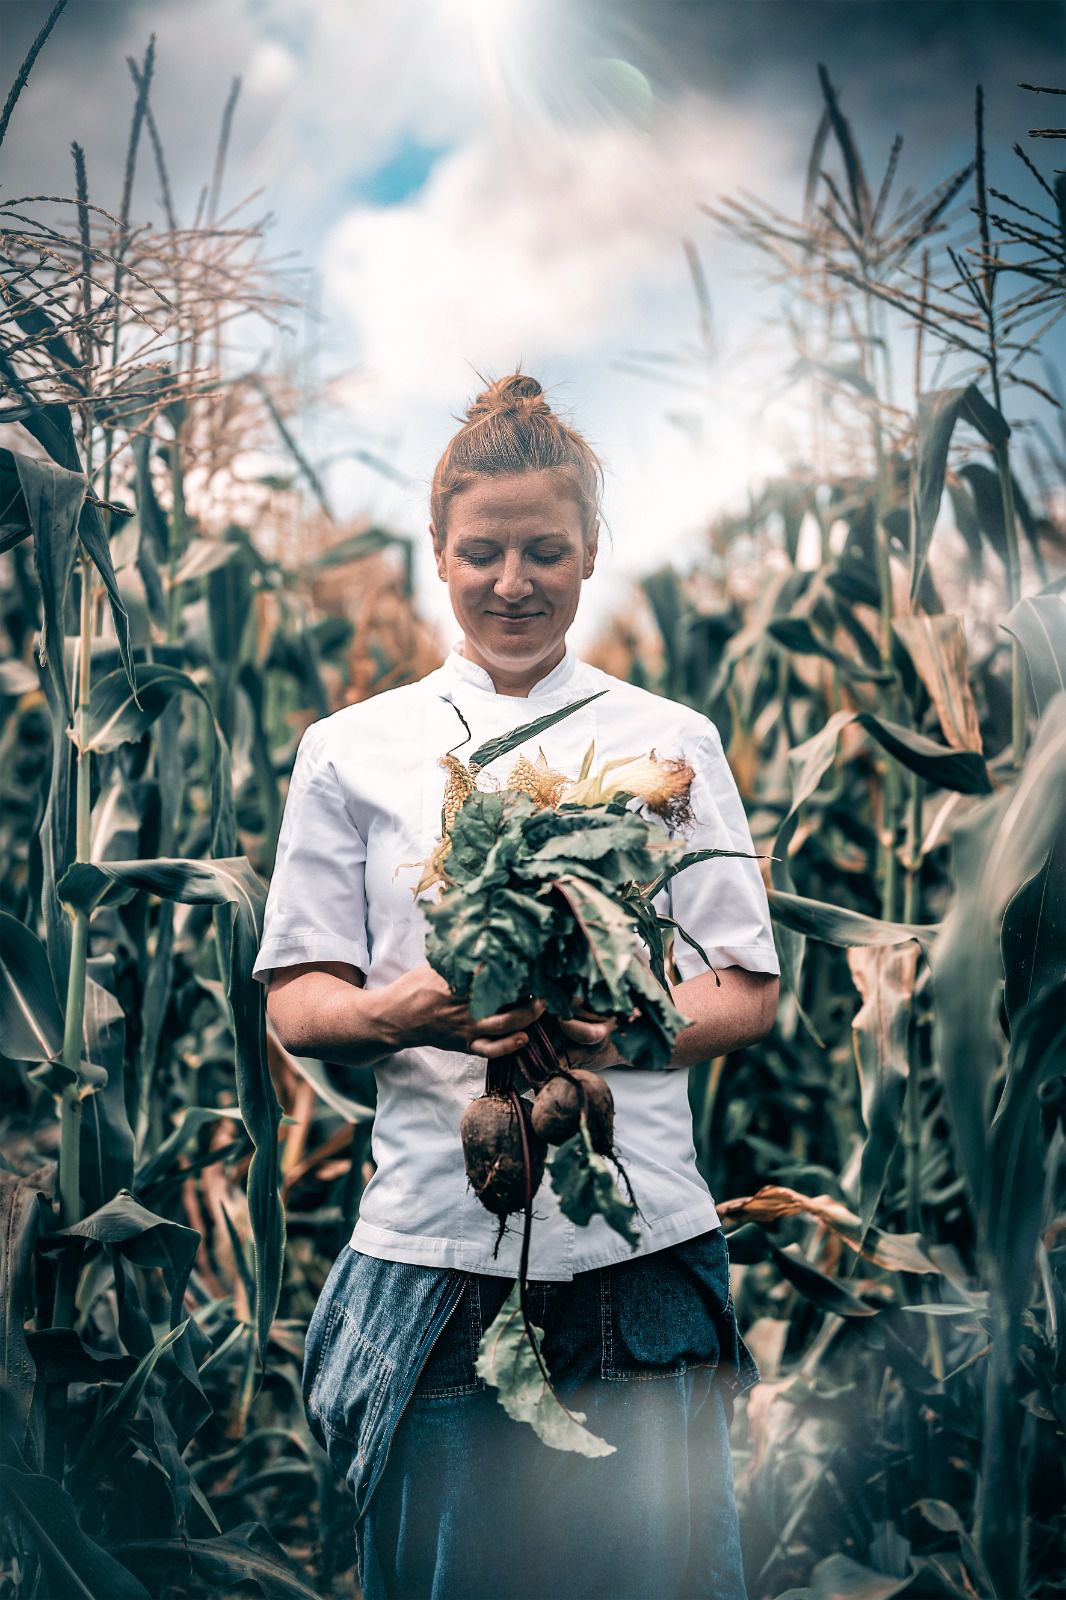 Chef Chantelle Nicholson will open a restaurant in 2022 that focuses on sustainable cuisine with a strong emphasis on vegetables